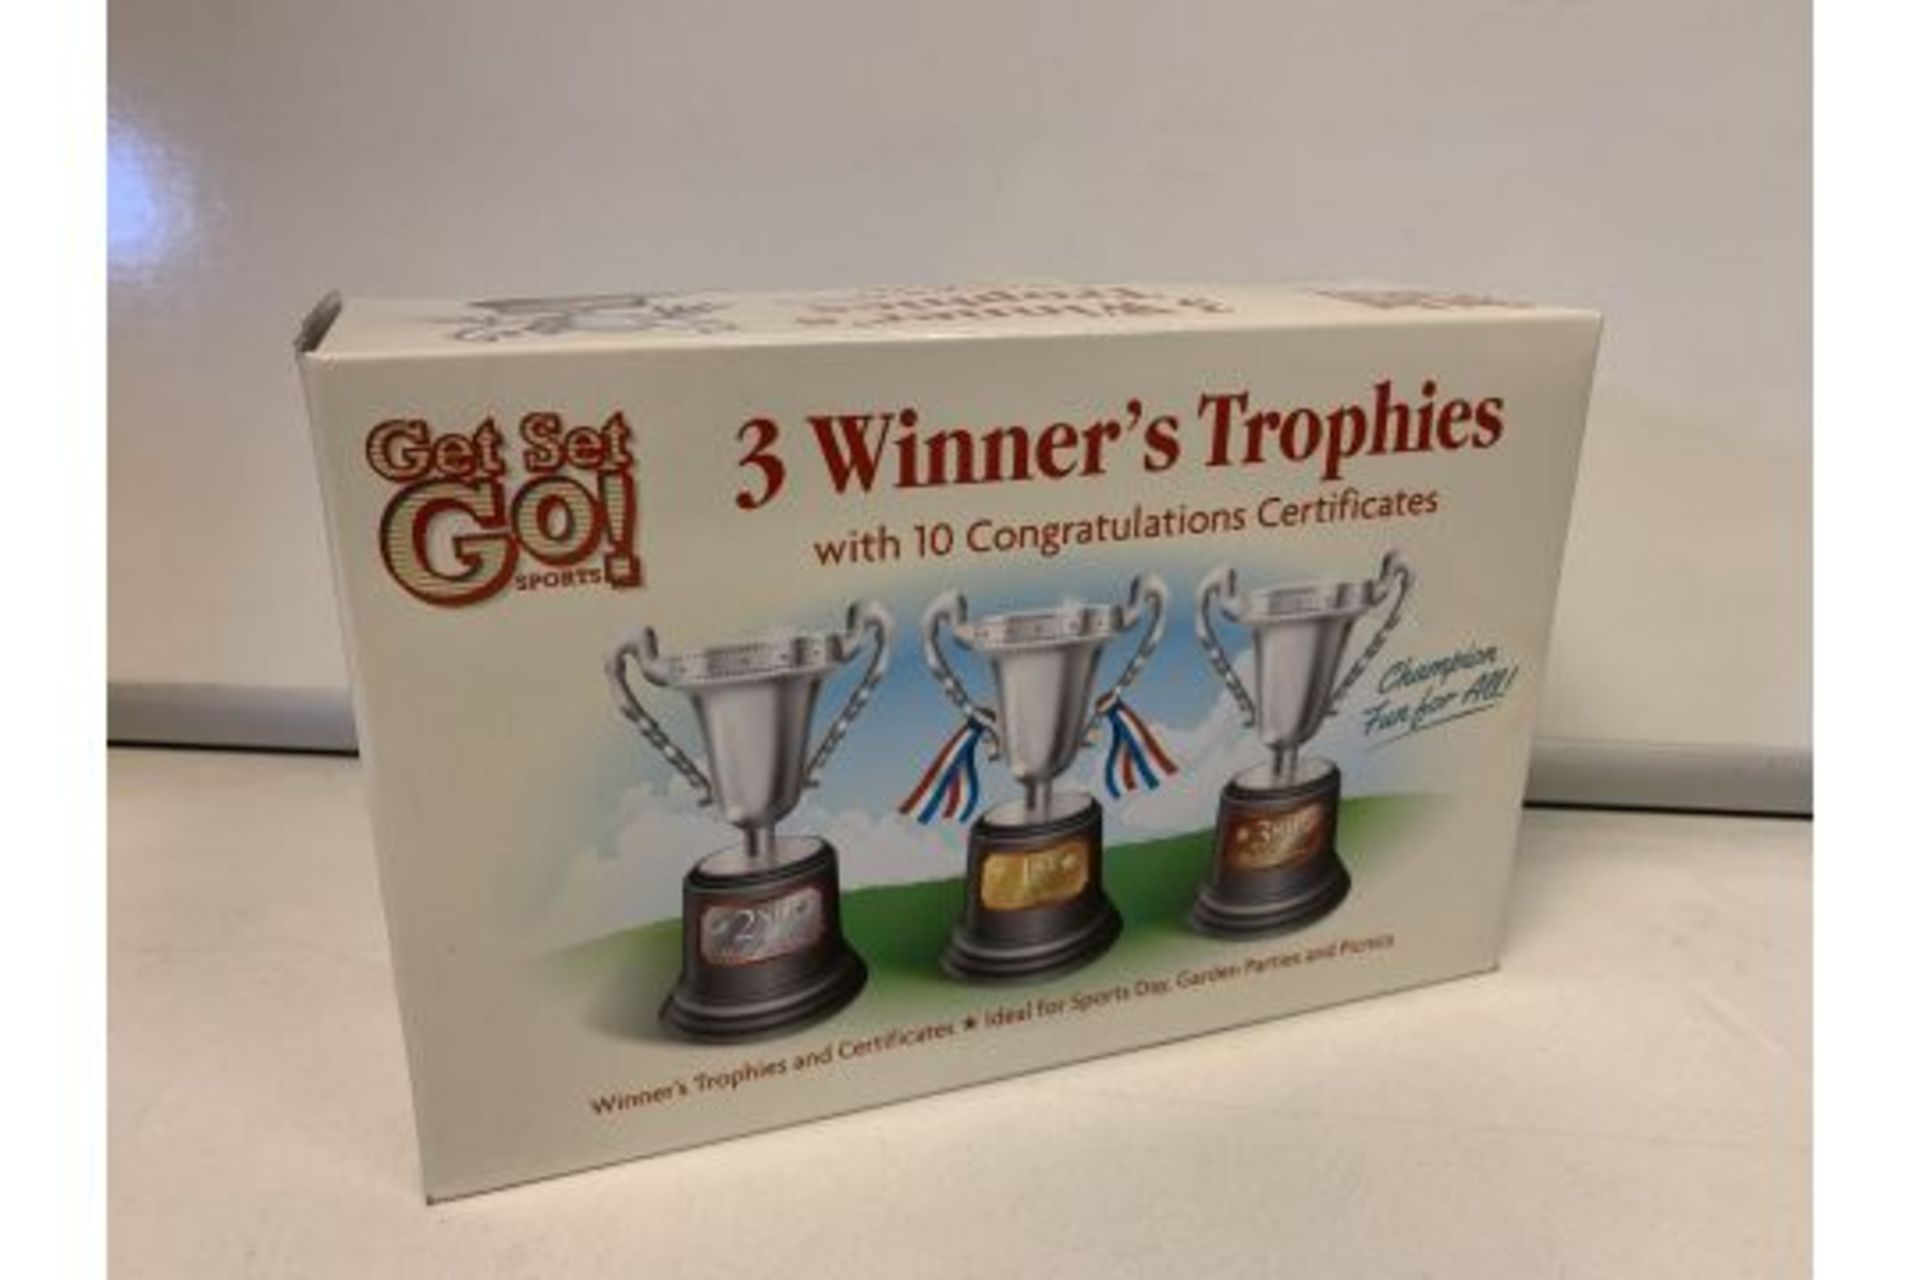 60 X NEW BOXED GET SET GO - SETS OF 3 WINNERS TROPHIES - 180 TROPHIES IN TOTAL .RRP £10 PER SET (